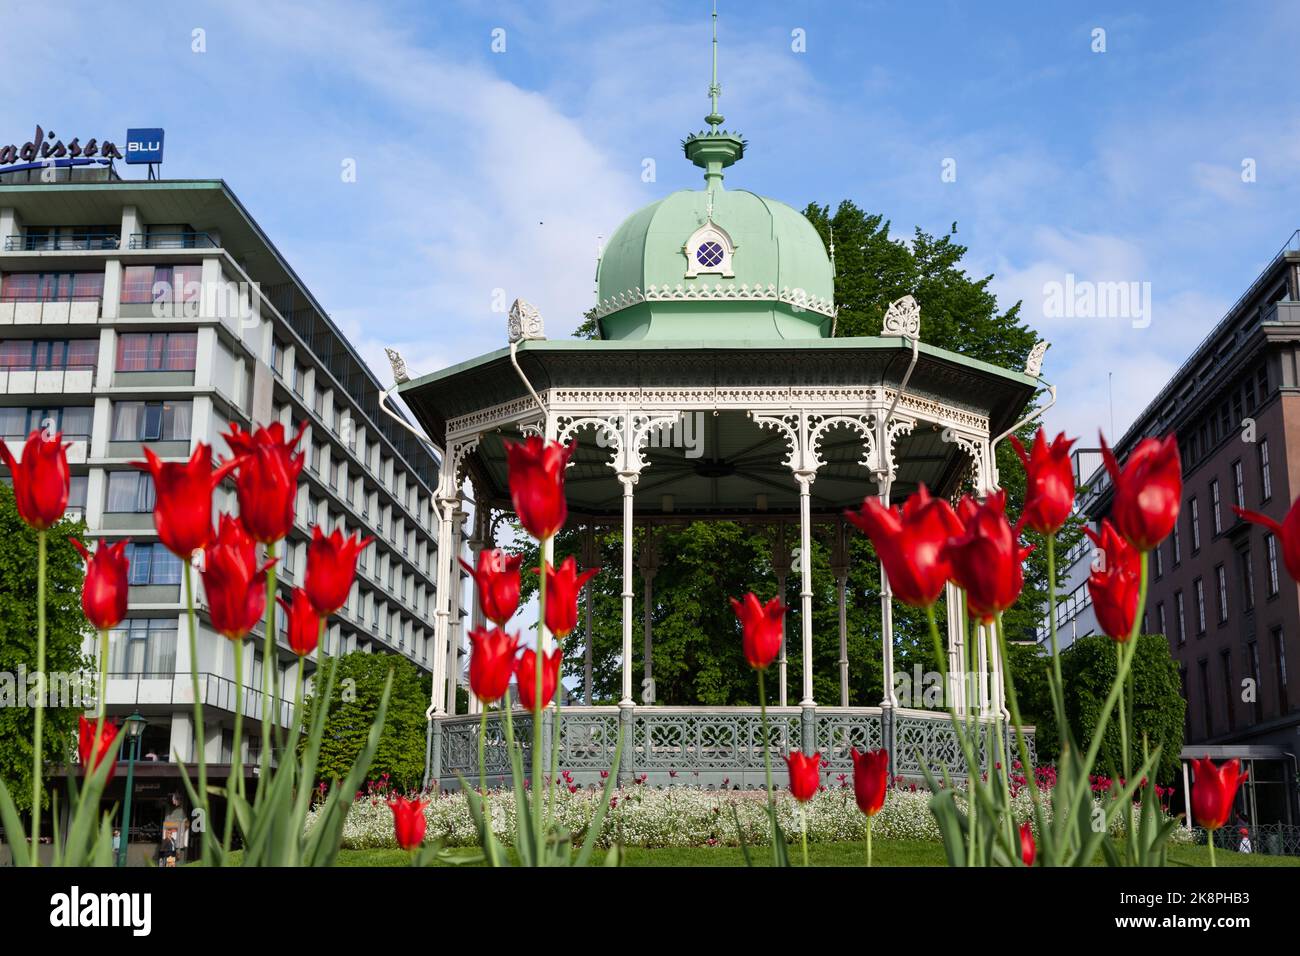 The blooming red tulips near a beautiful gazebo near Lille Lungegardsvannet lake in Bergen, Norway Stock Photo